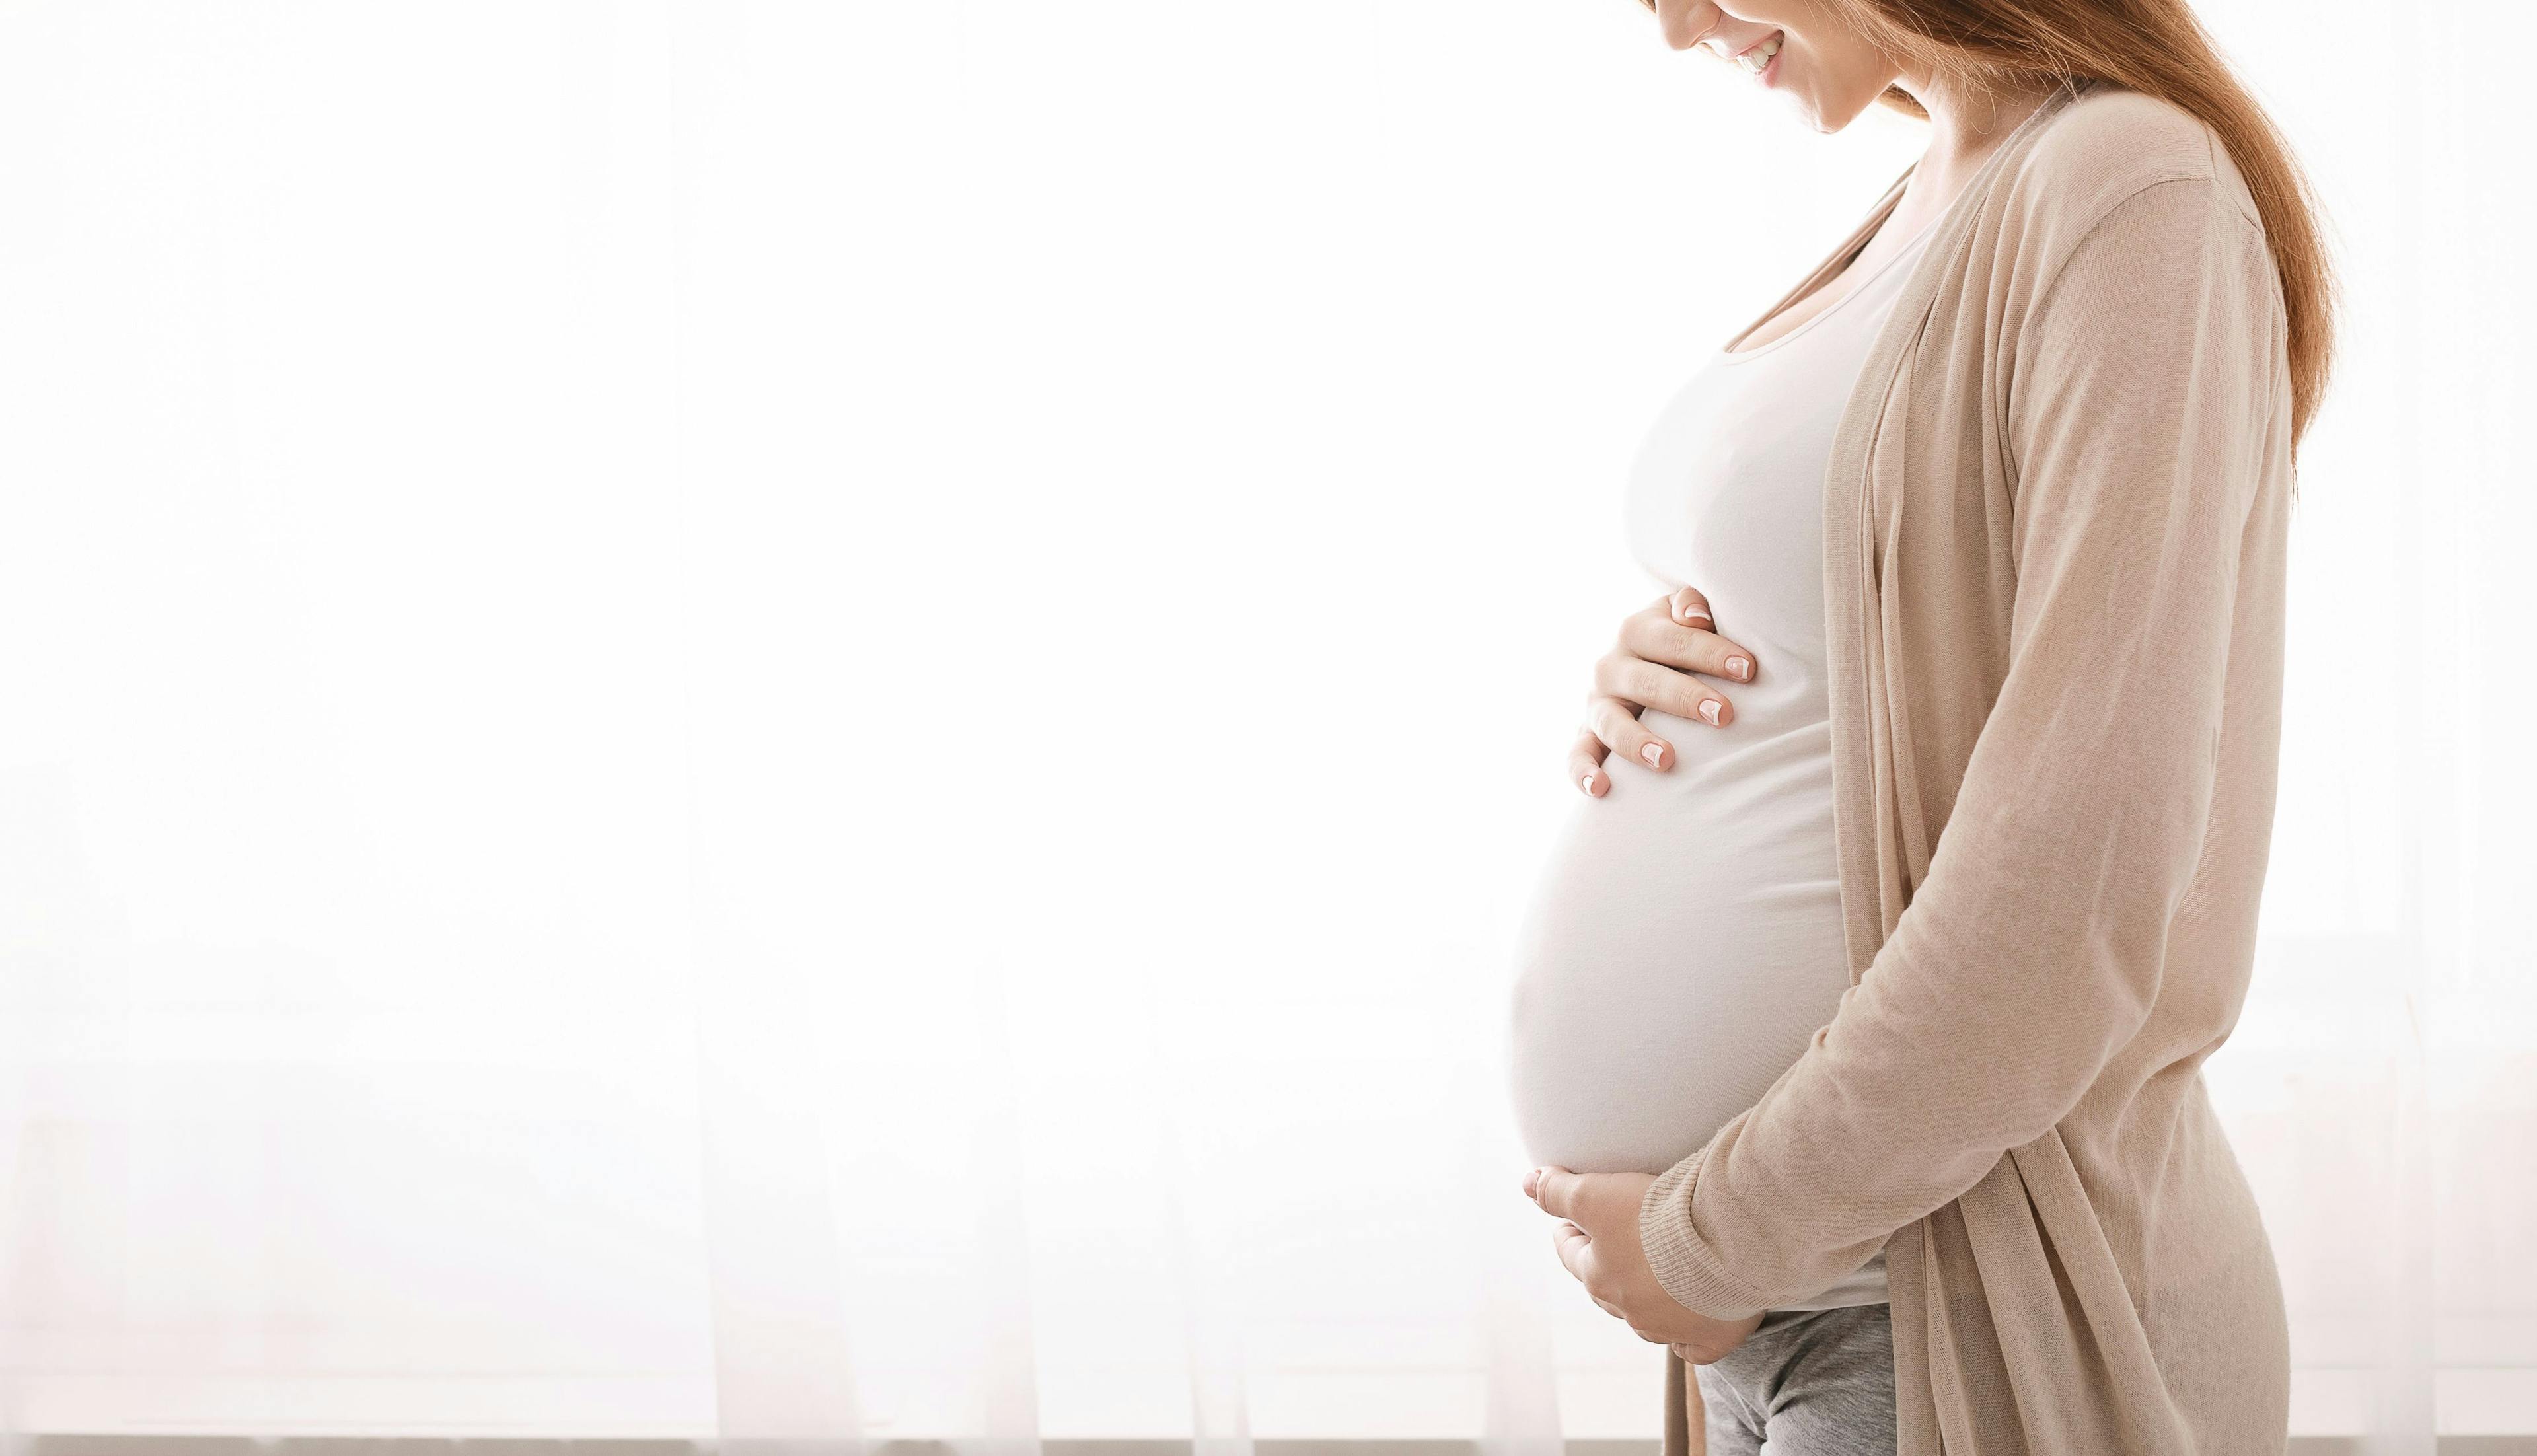 CDC Study Shows mRNA Vaccination During Pregnancy Protects Infants From COVID-19